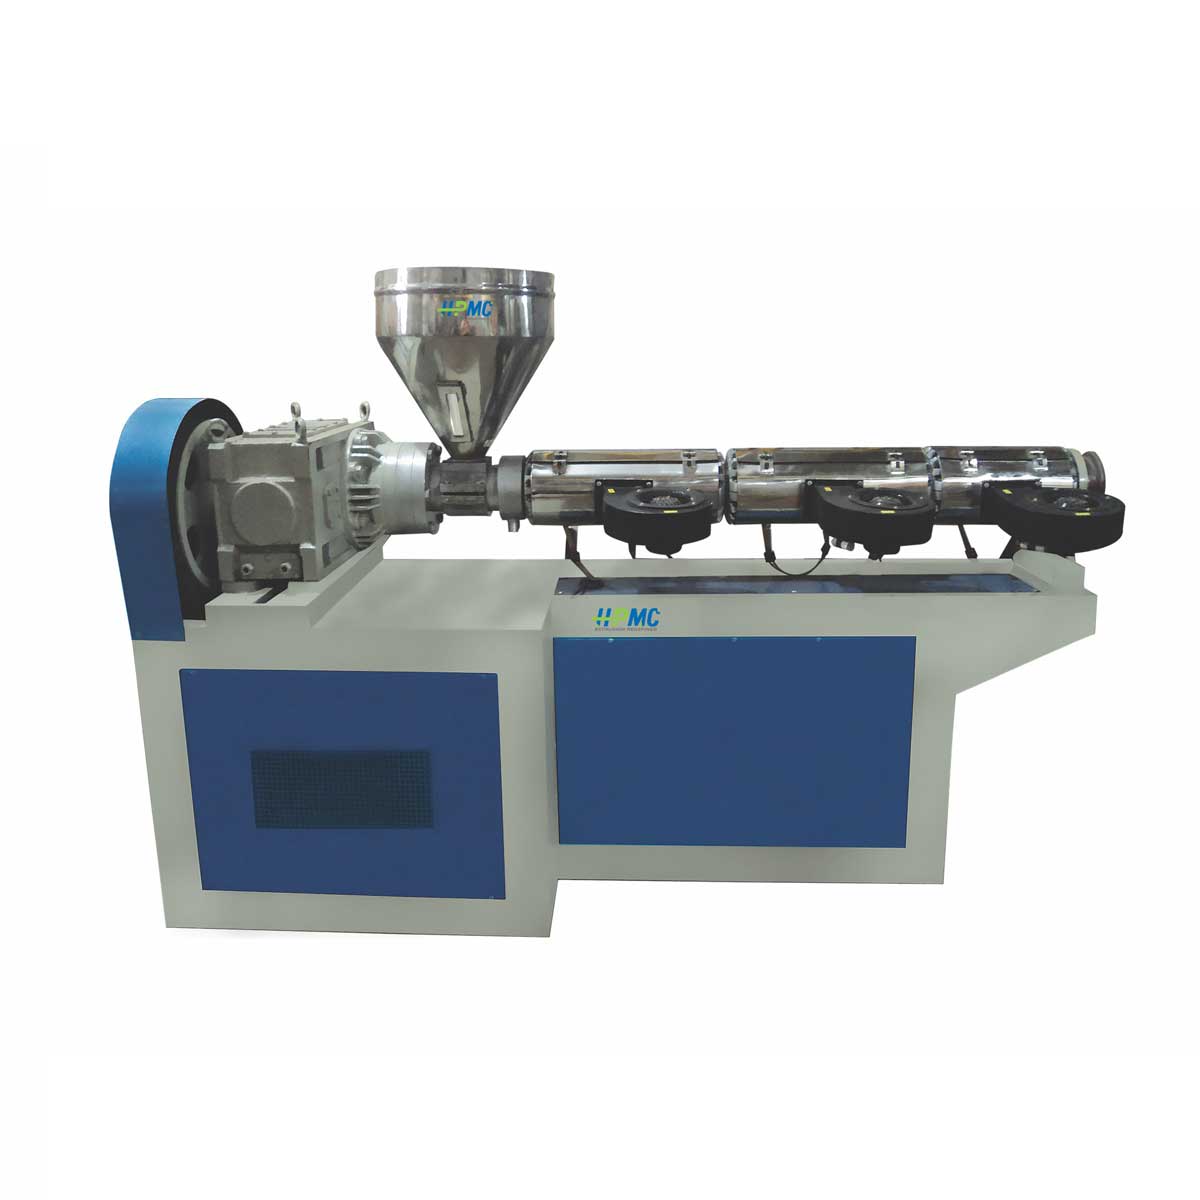 LLDPE Pipe Machine Manufacturers, Suppliers and Exporters in Delhi